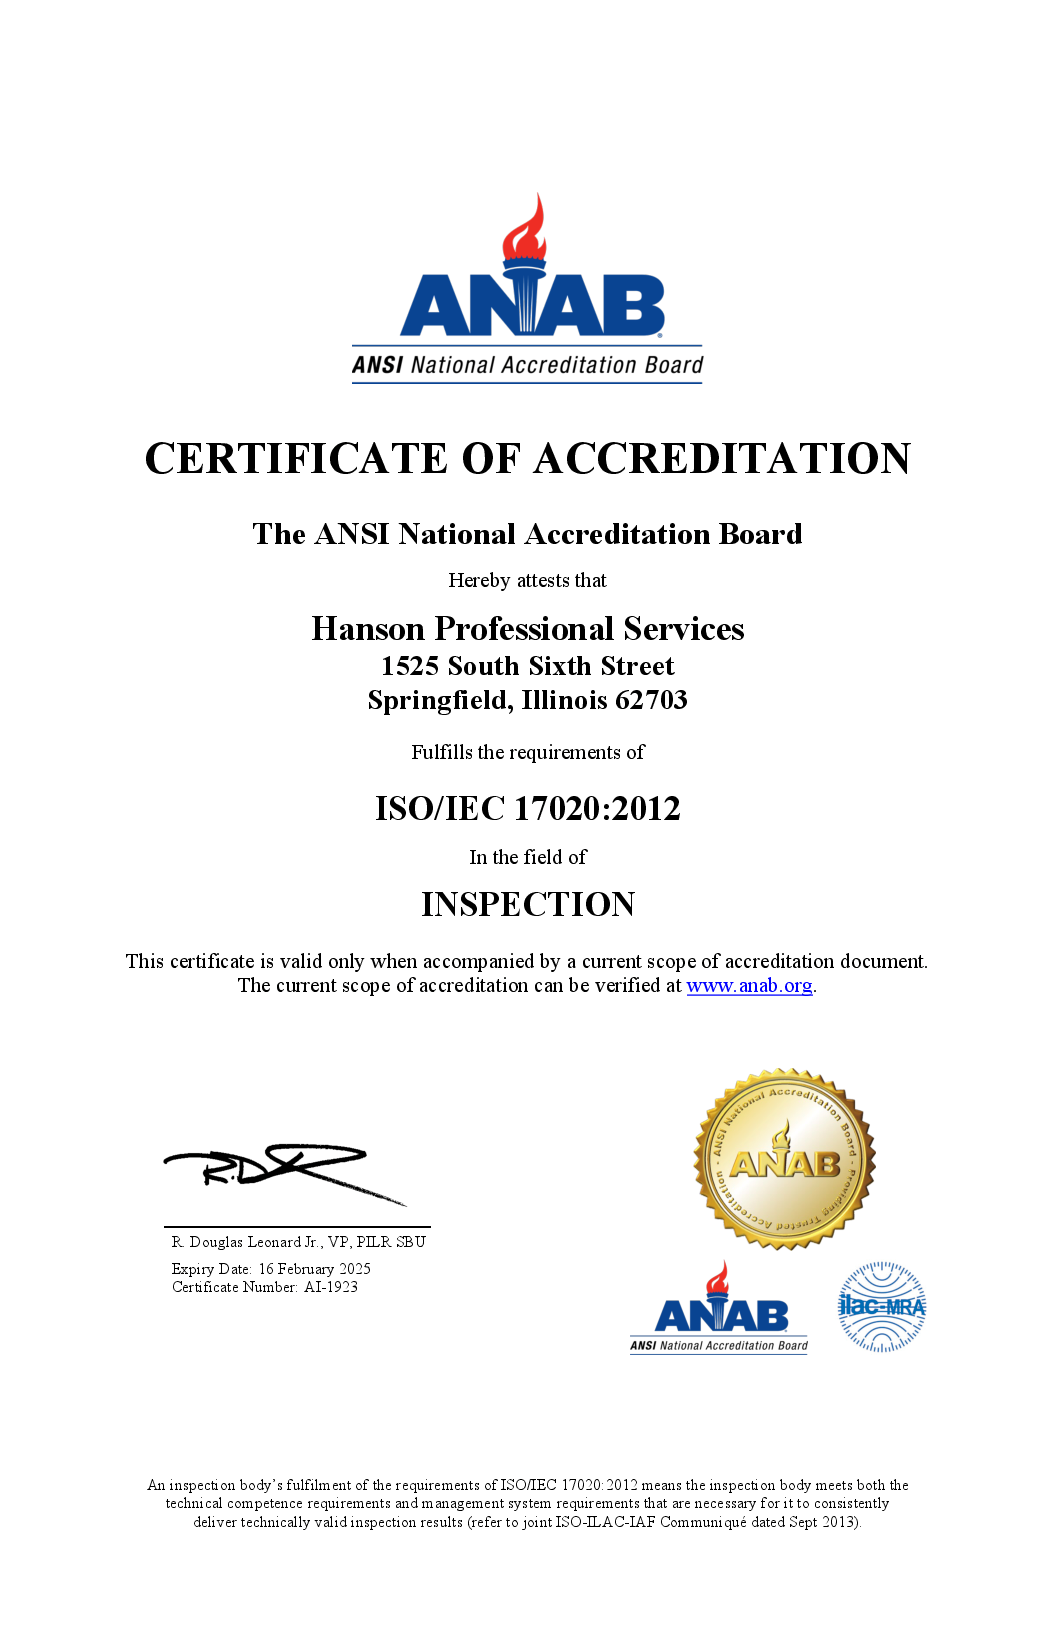 Cover image for ANAB certificate of accreditation